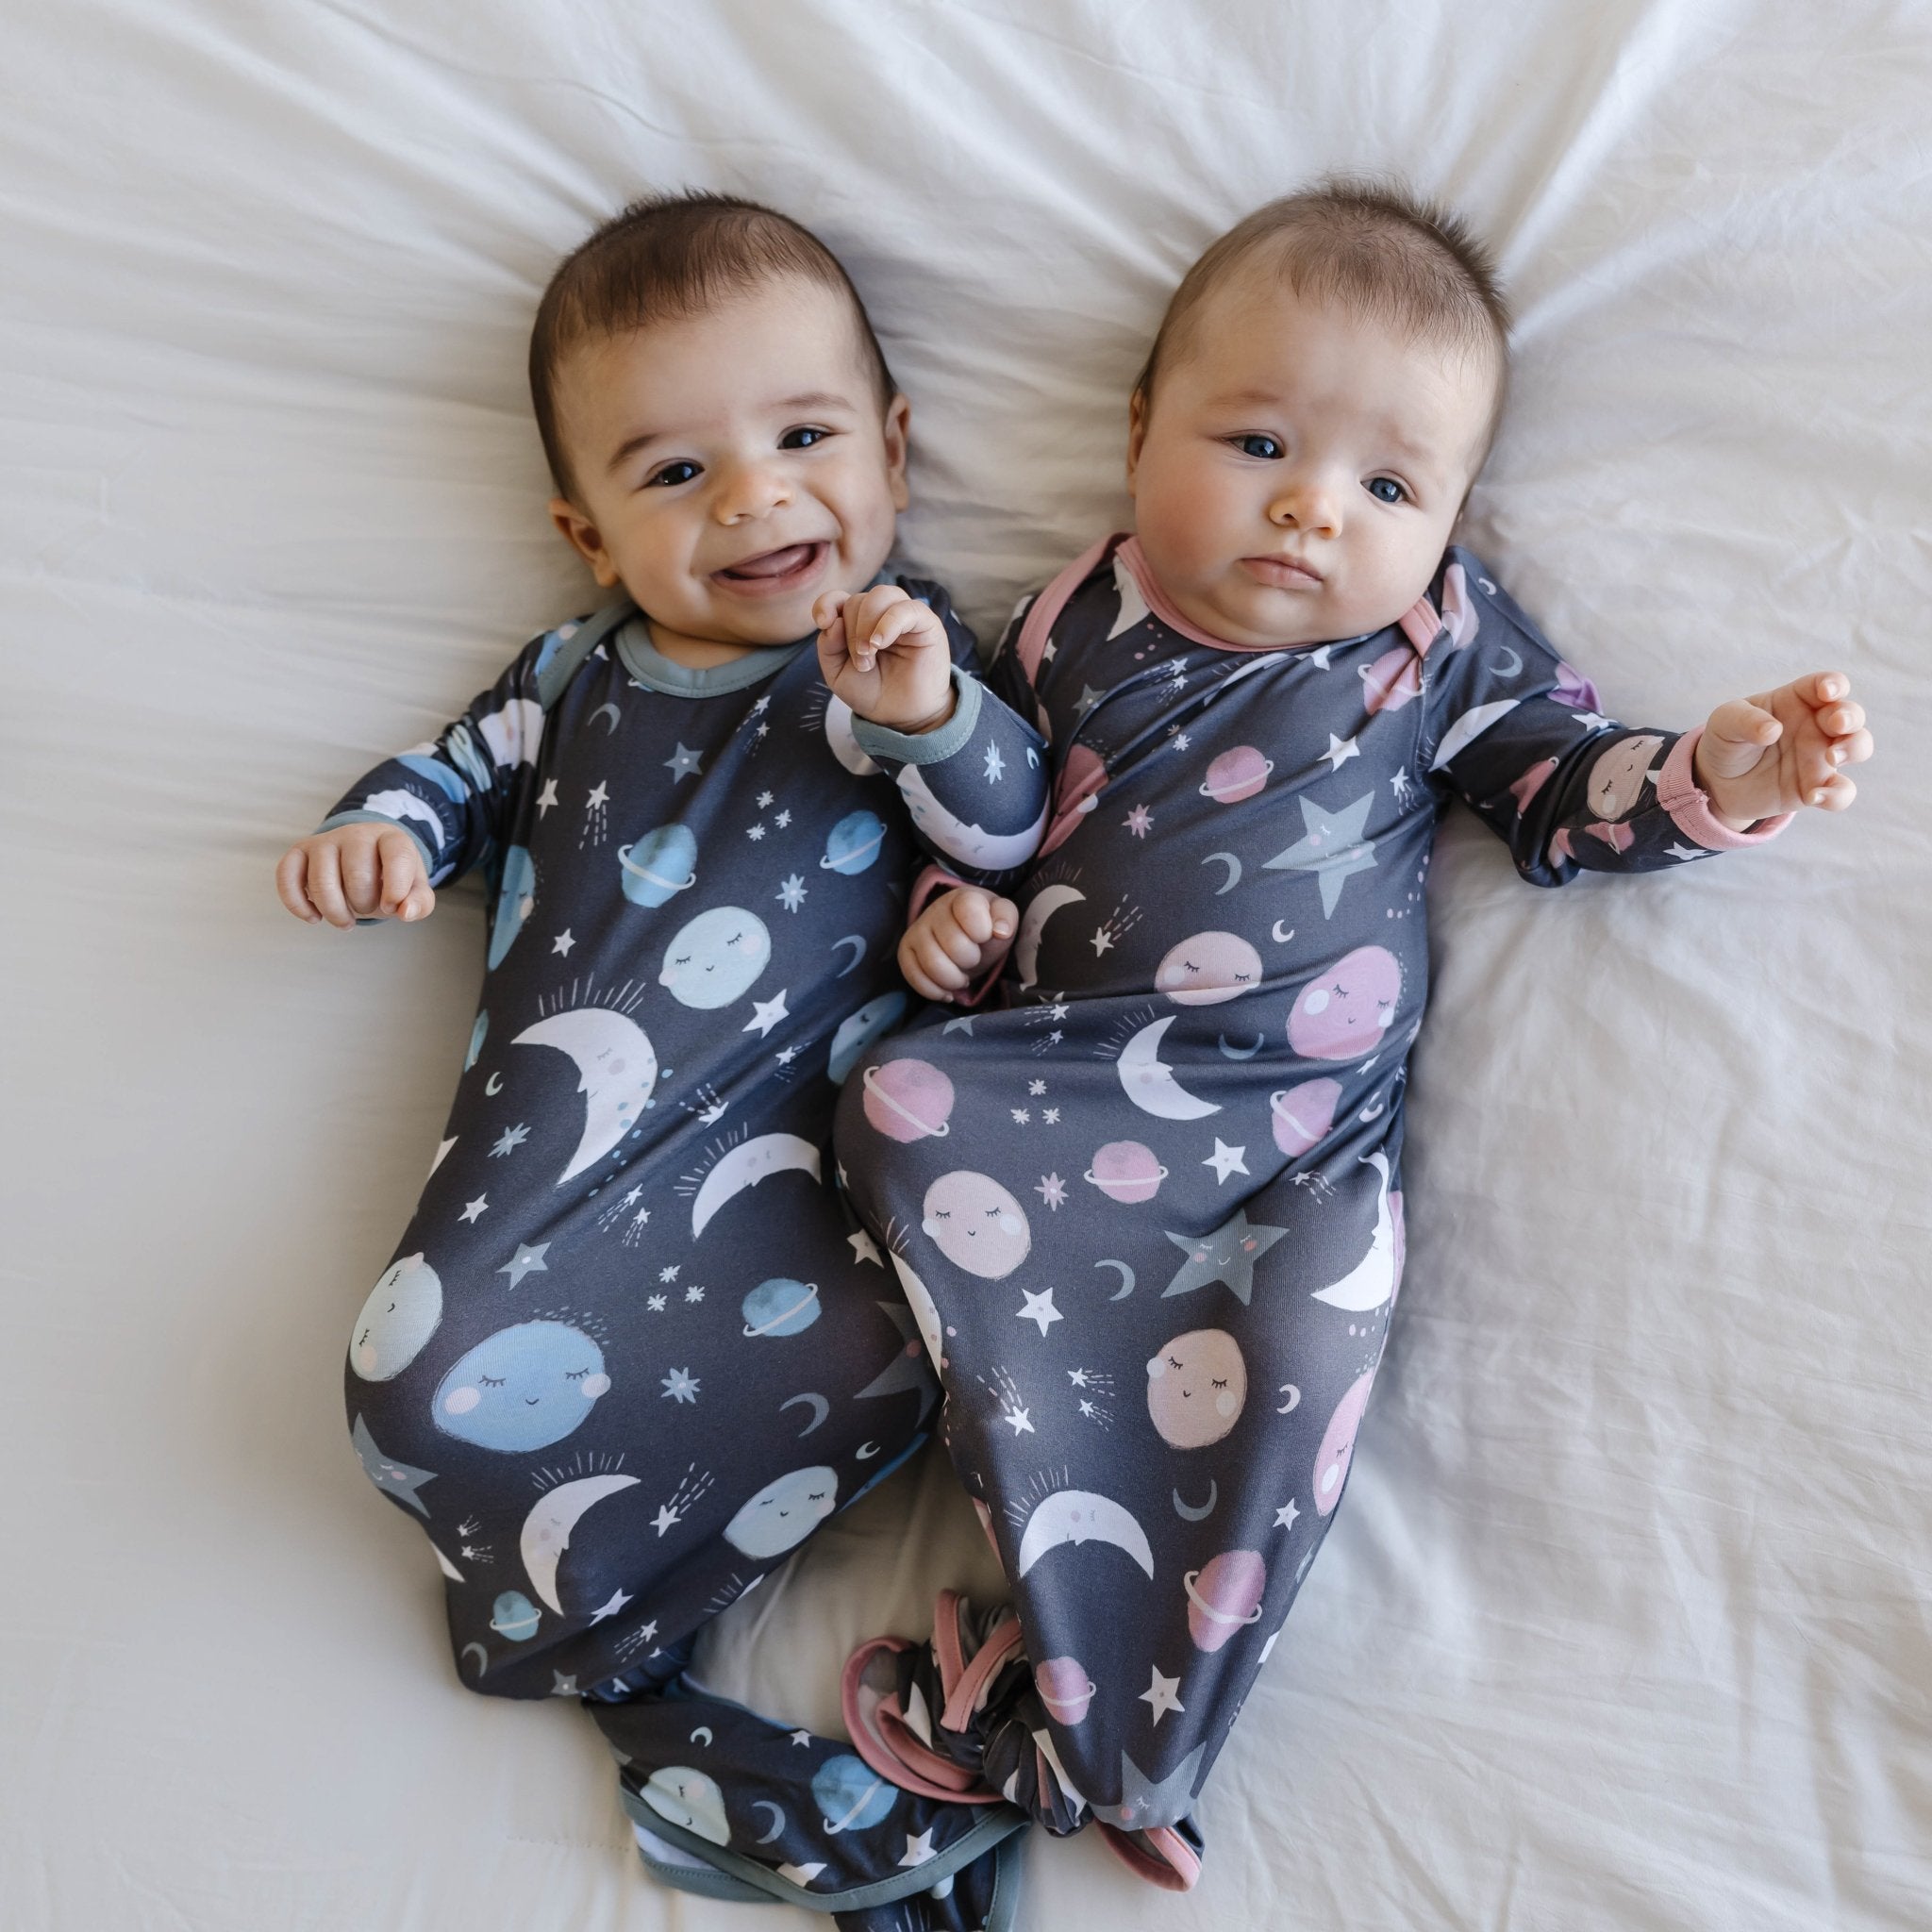 Top 3 Reasons A Knotted Baby Gown is the Perfect Coming Home Outfit   poshpeanutcom